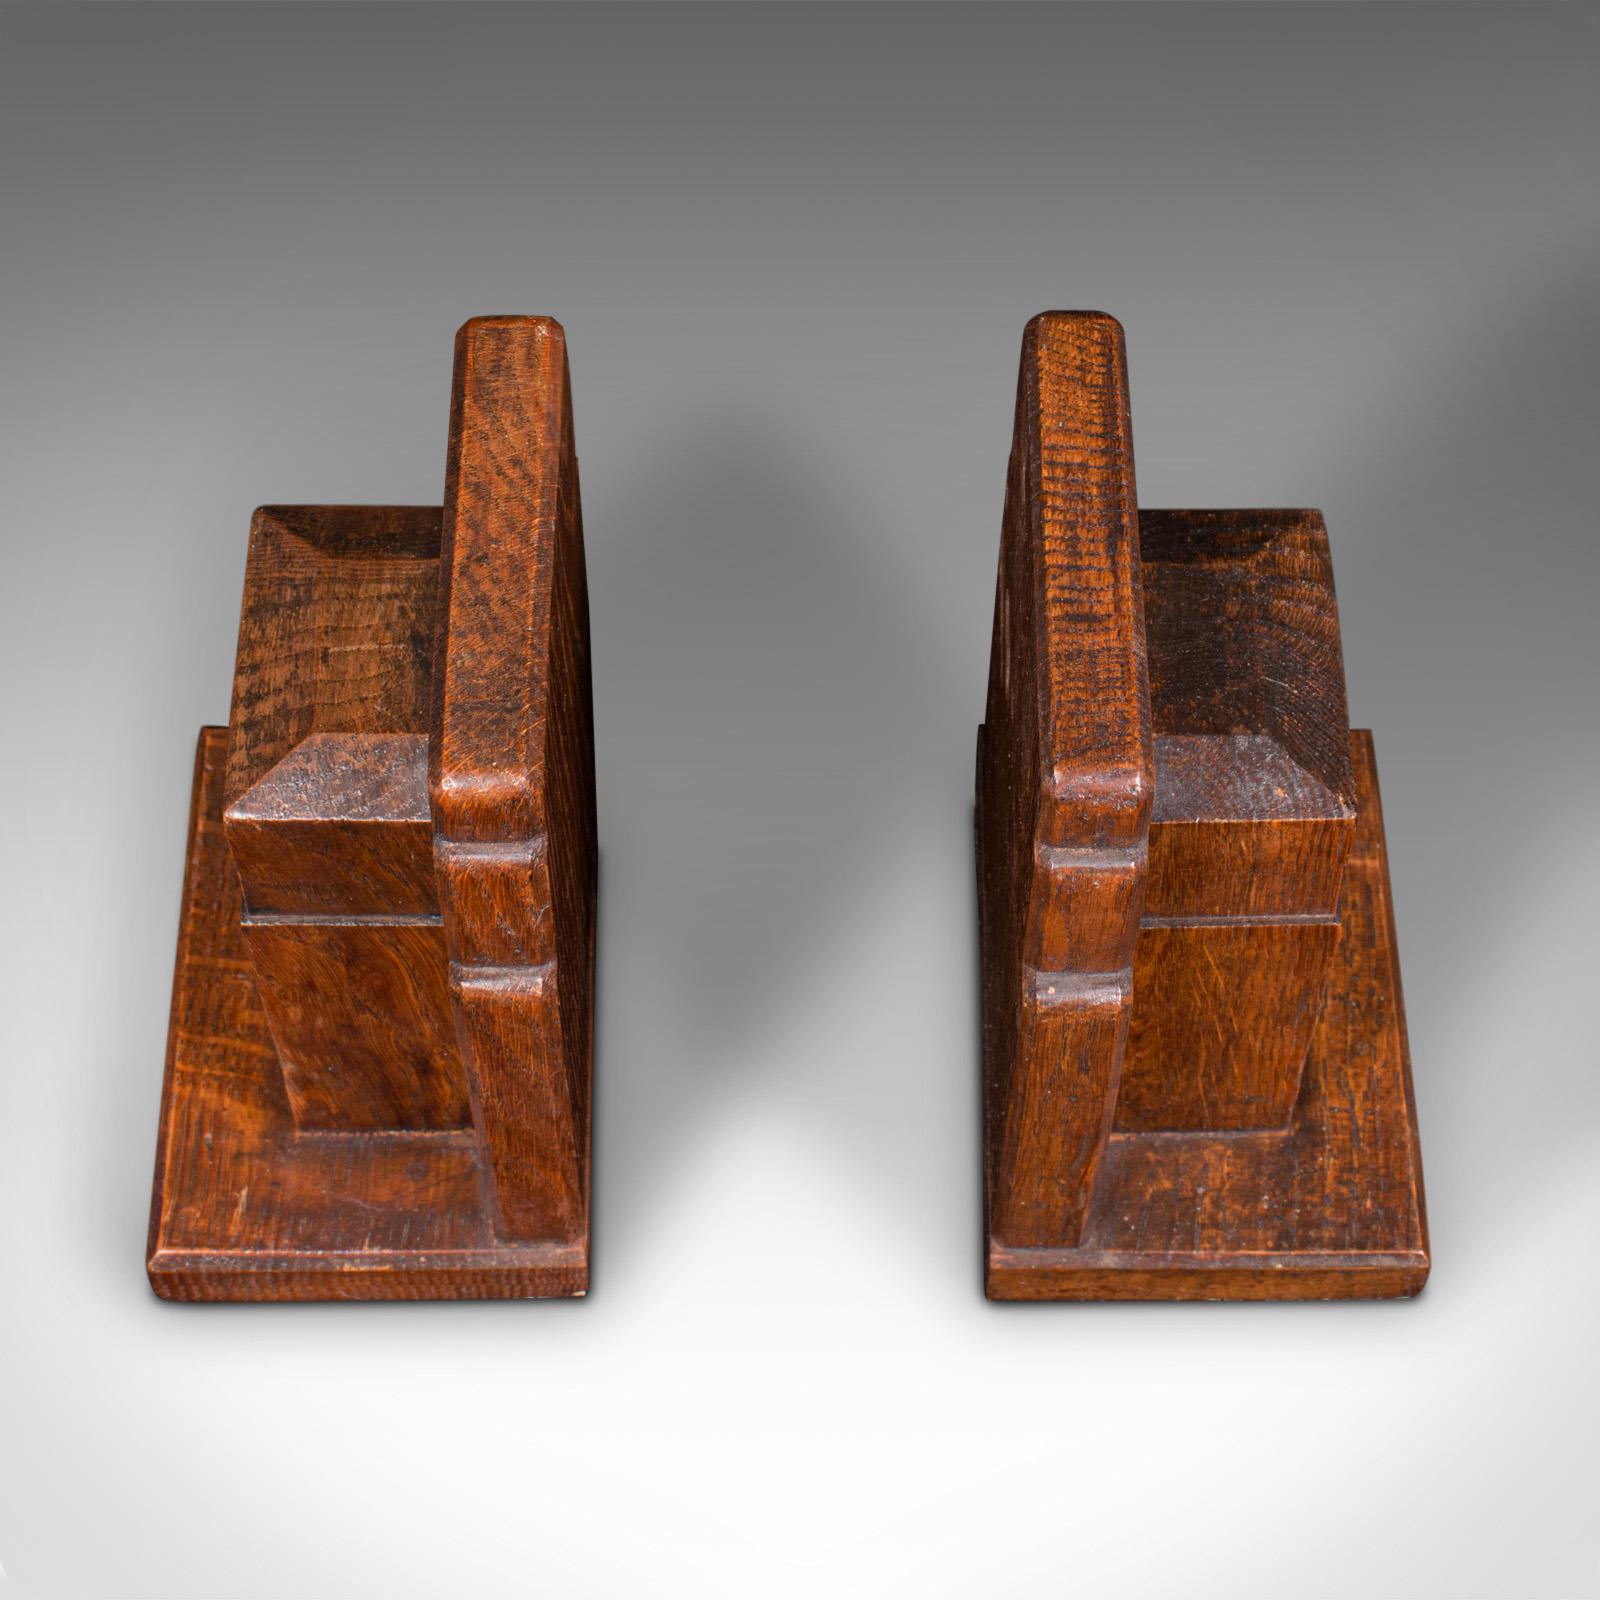 Pair of Vintage Decorative Bookends, English, Oak, Book Rest, Early 20th, C.1930 For Sale 1